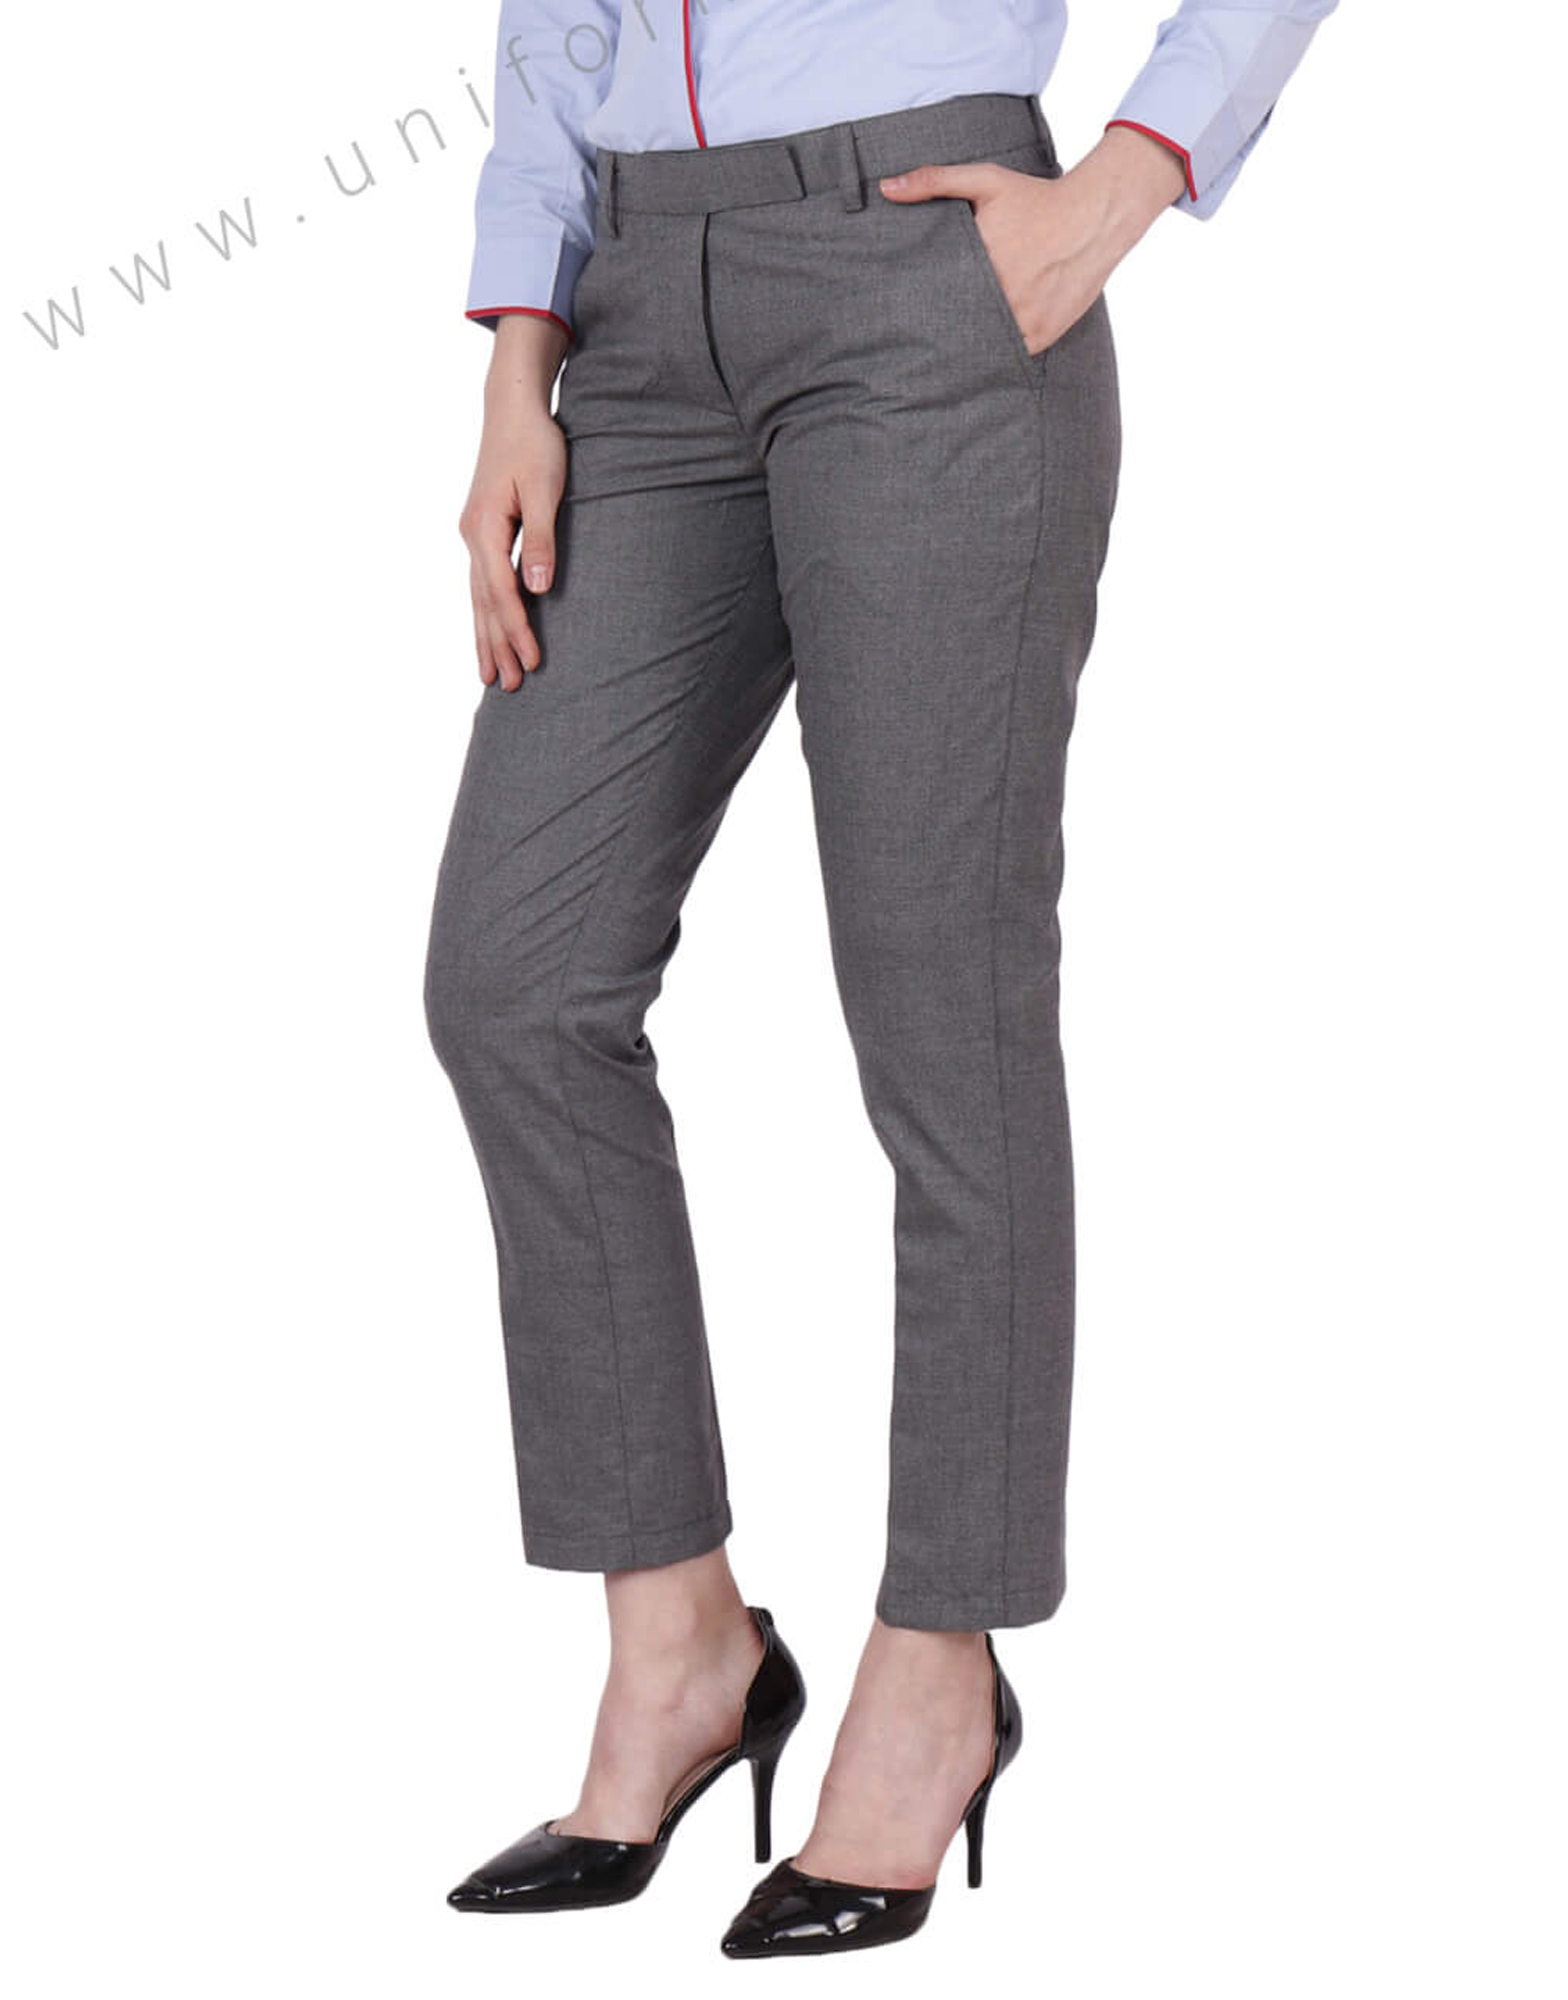 Buy Light Grey Trouser for Female Online @ Best Prices in India ...